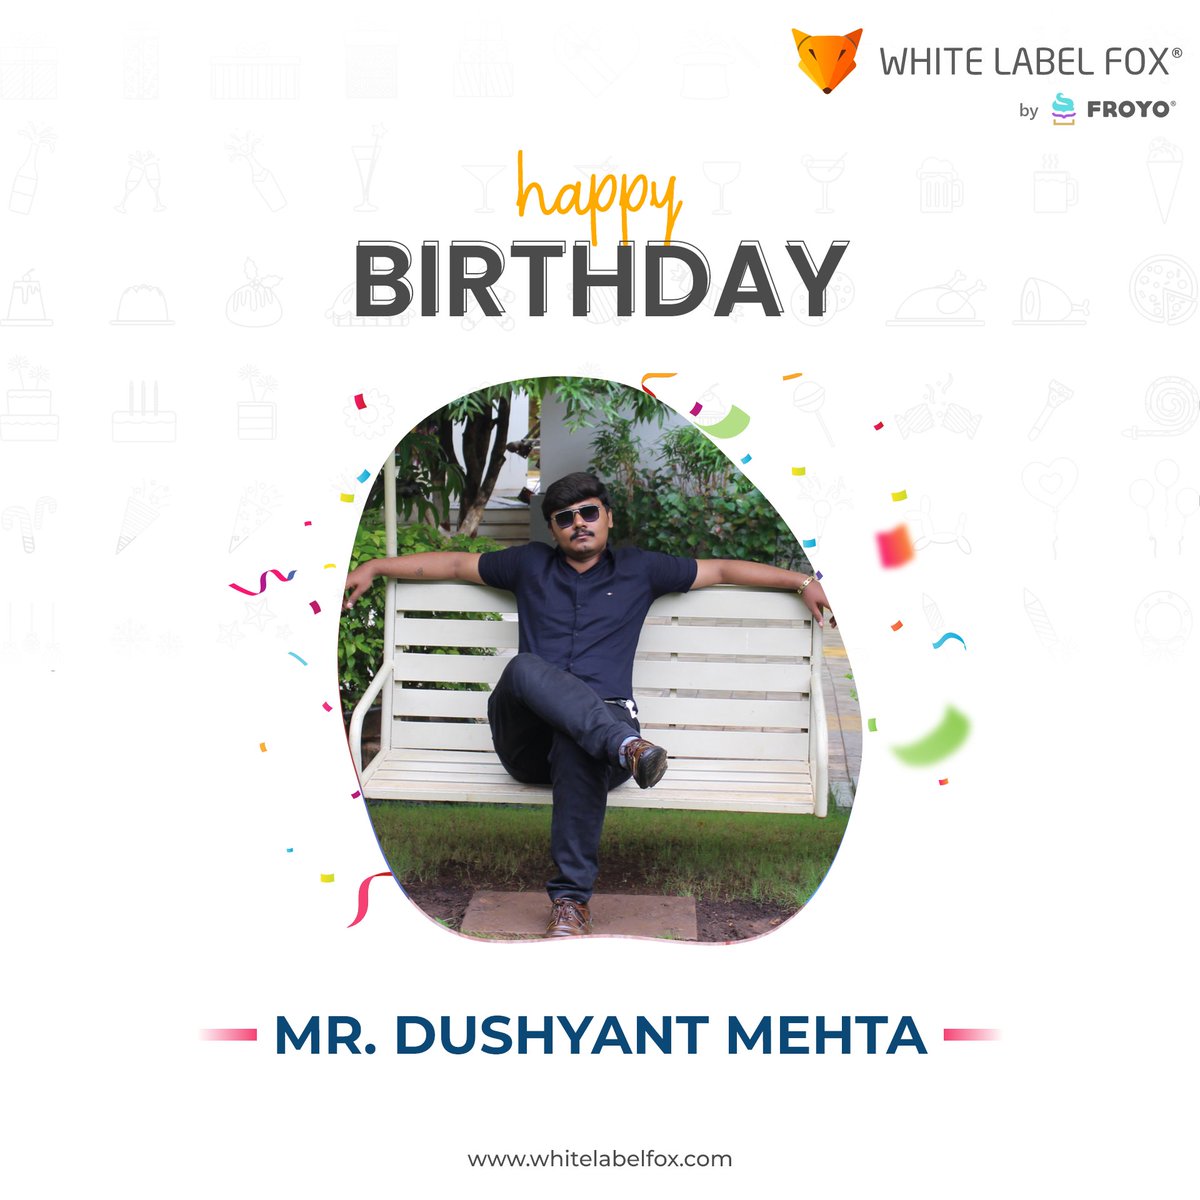 May you be gifted with life’s biggest joys and never-ending bliss.
Happy birthday!
.
.
#employeebirthday #birthdaypost #birthday #birthdaywishes #happybirthdaytoyou #birthdaycelebration #birthdayvibes #companyculture #happiness #team #whitelabelfox